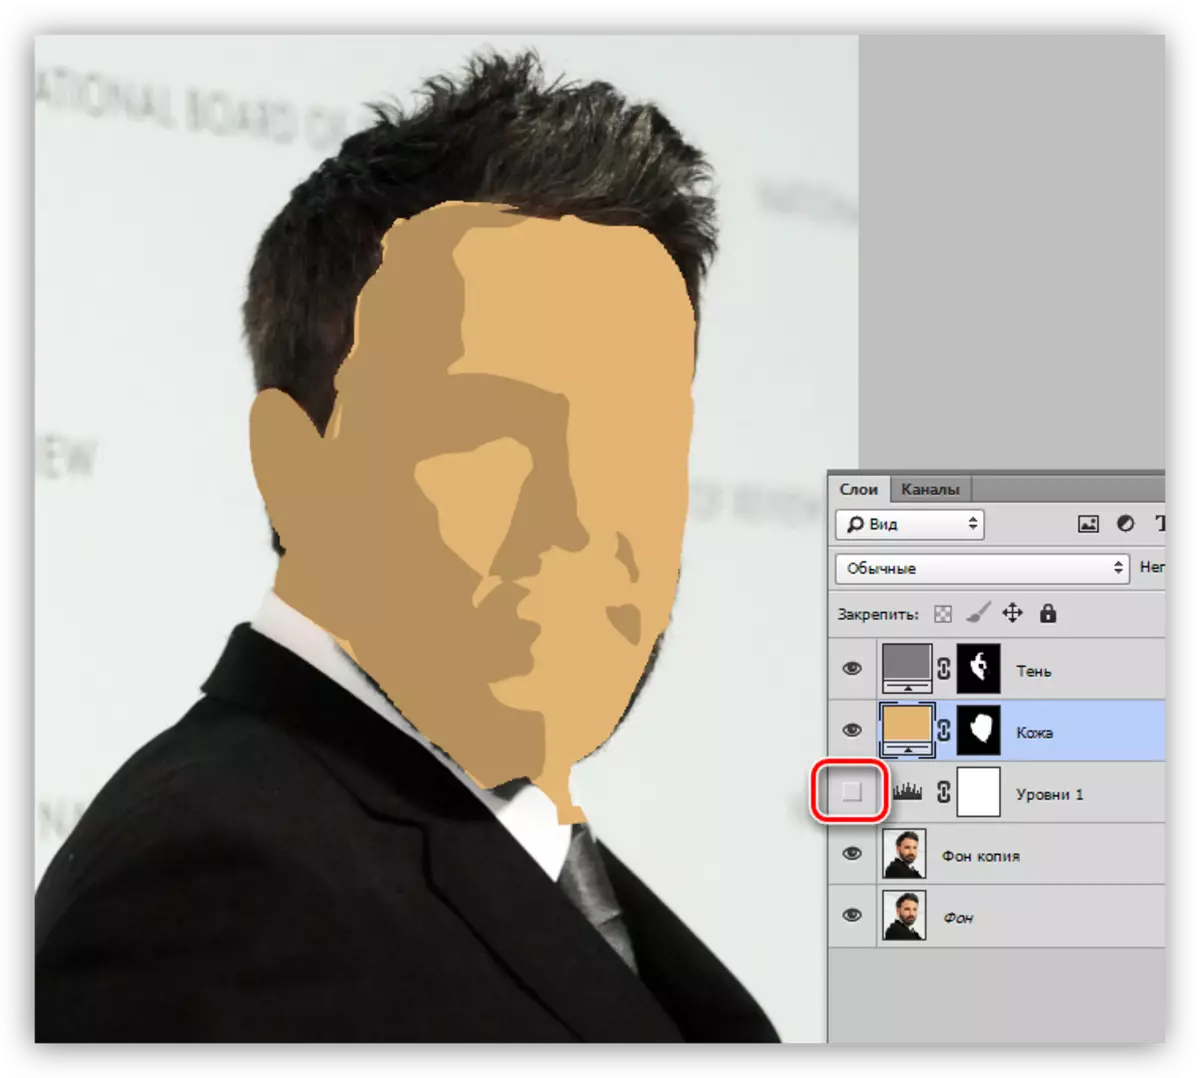 The result of drawing the shadow of the cartoon photo in Photoshop